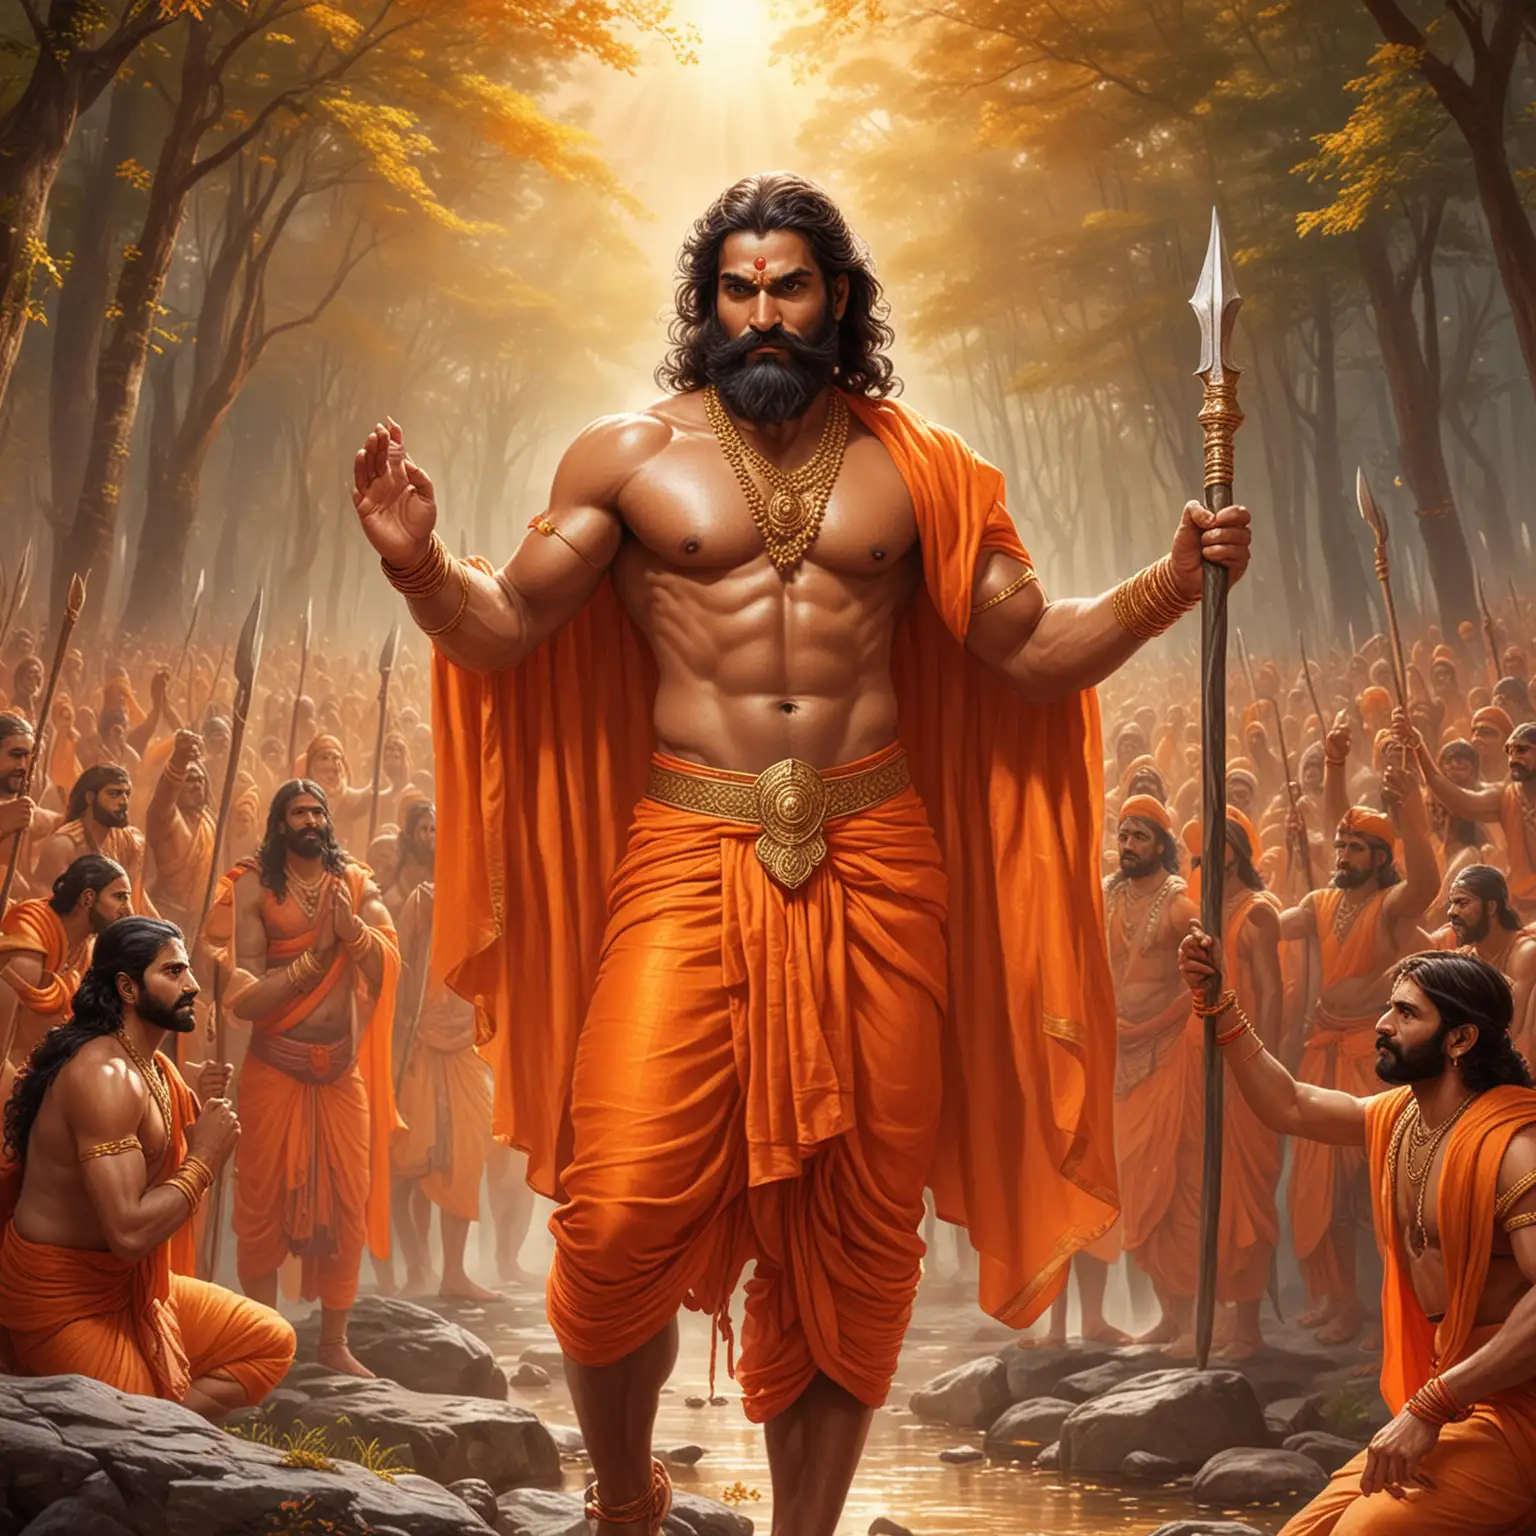 generate mahabharata character parshuram giving blessing in orange clothes
